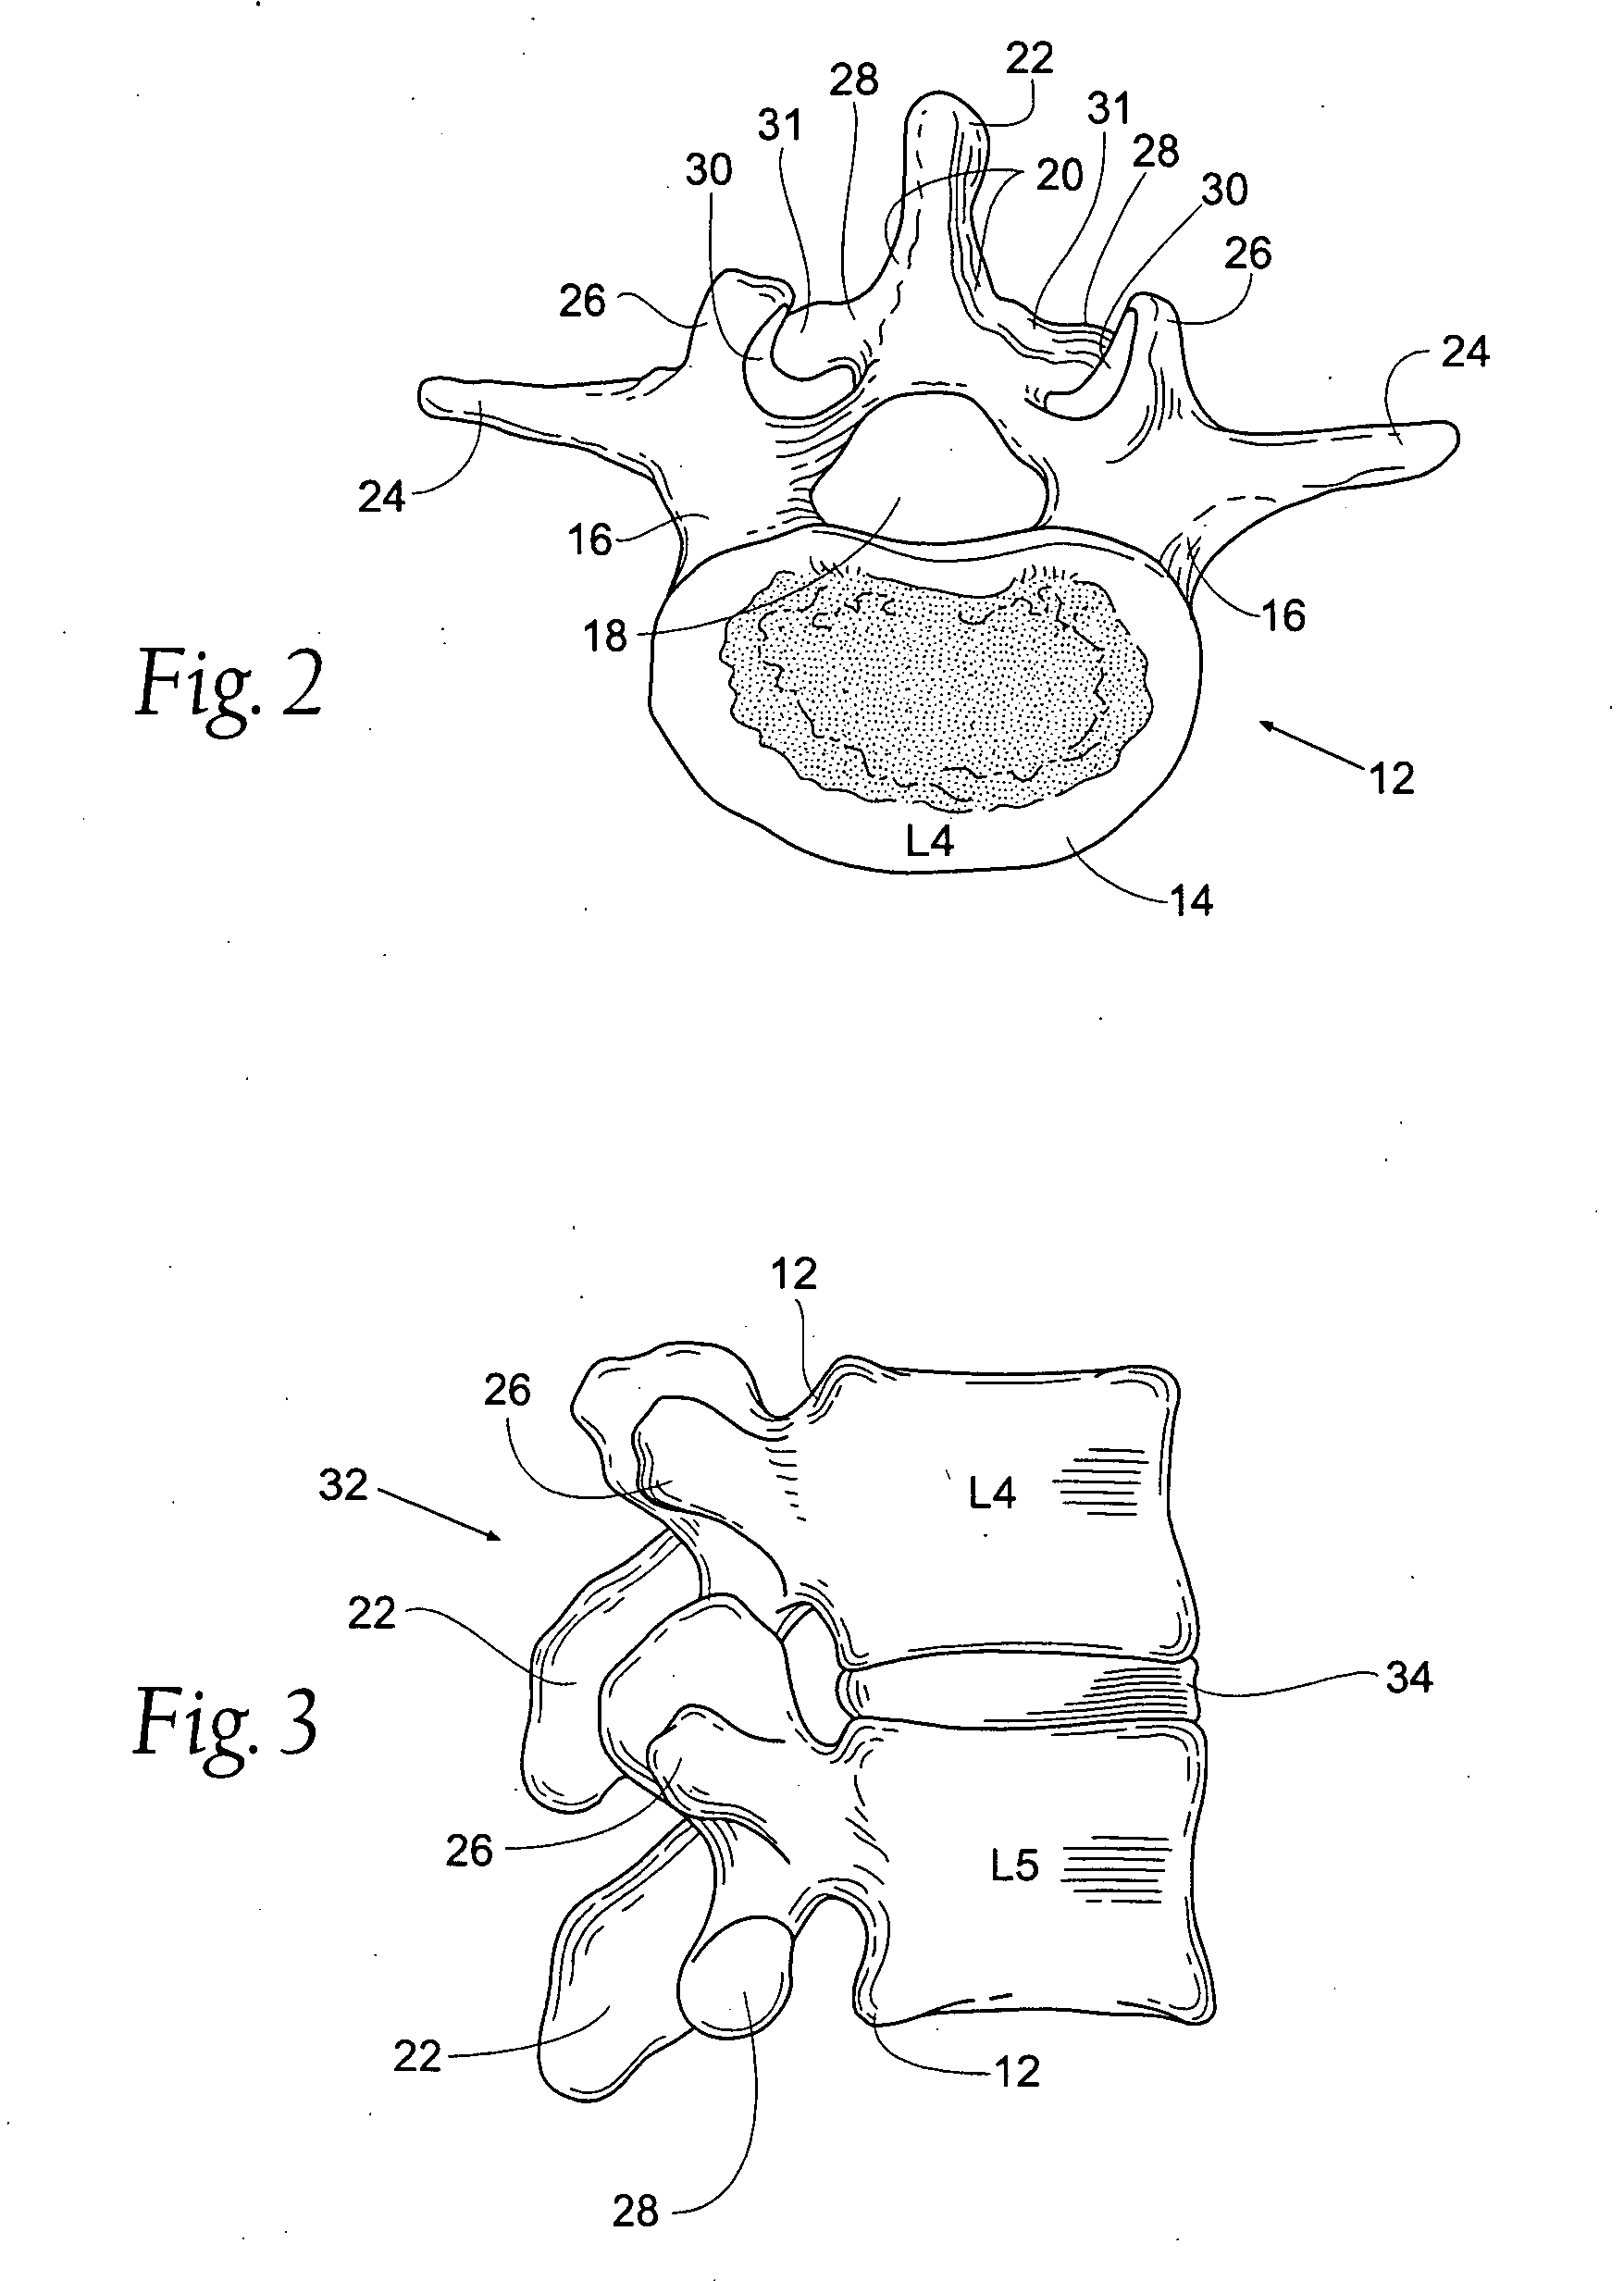 Prostheses, systems and methods for replacement of natural facet joints with artificial facet joint surfaces